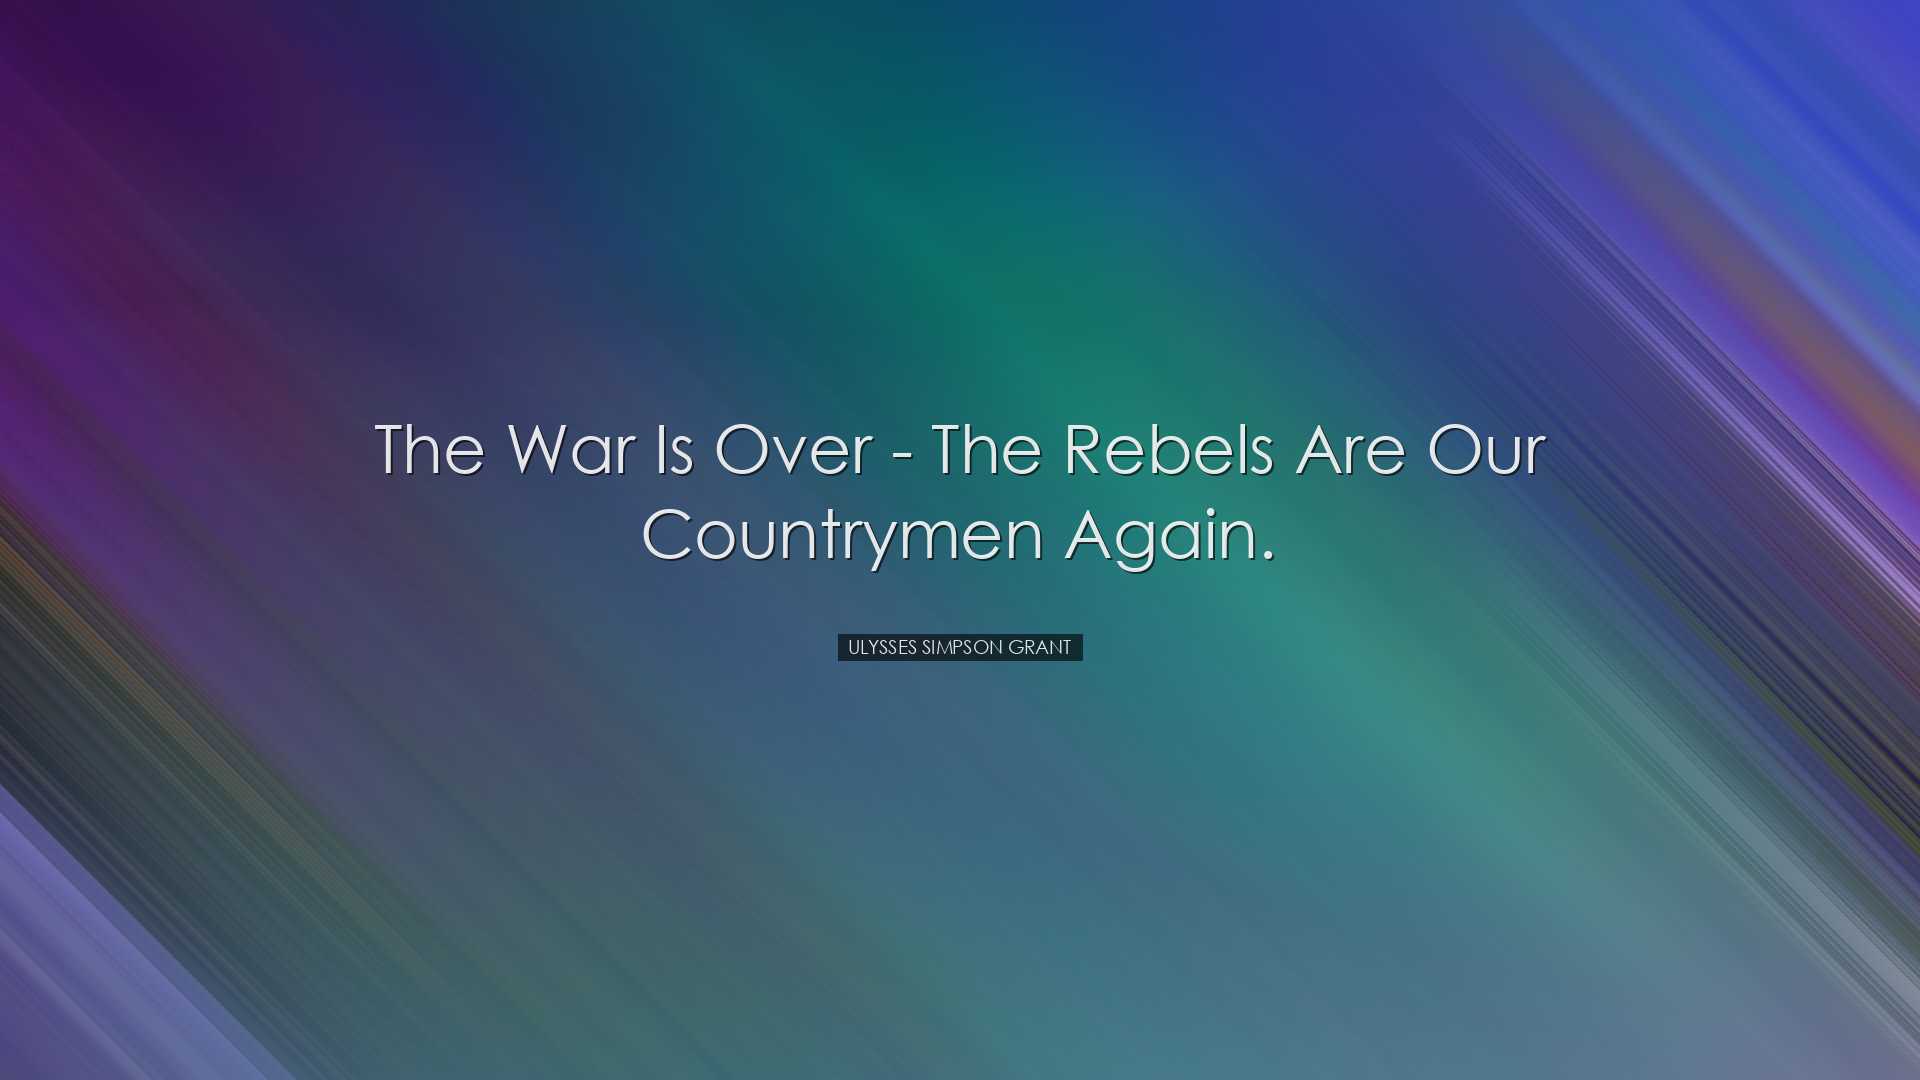 The War is over - the rebels are our countrymen again. - Ulysses S